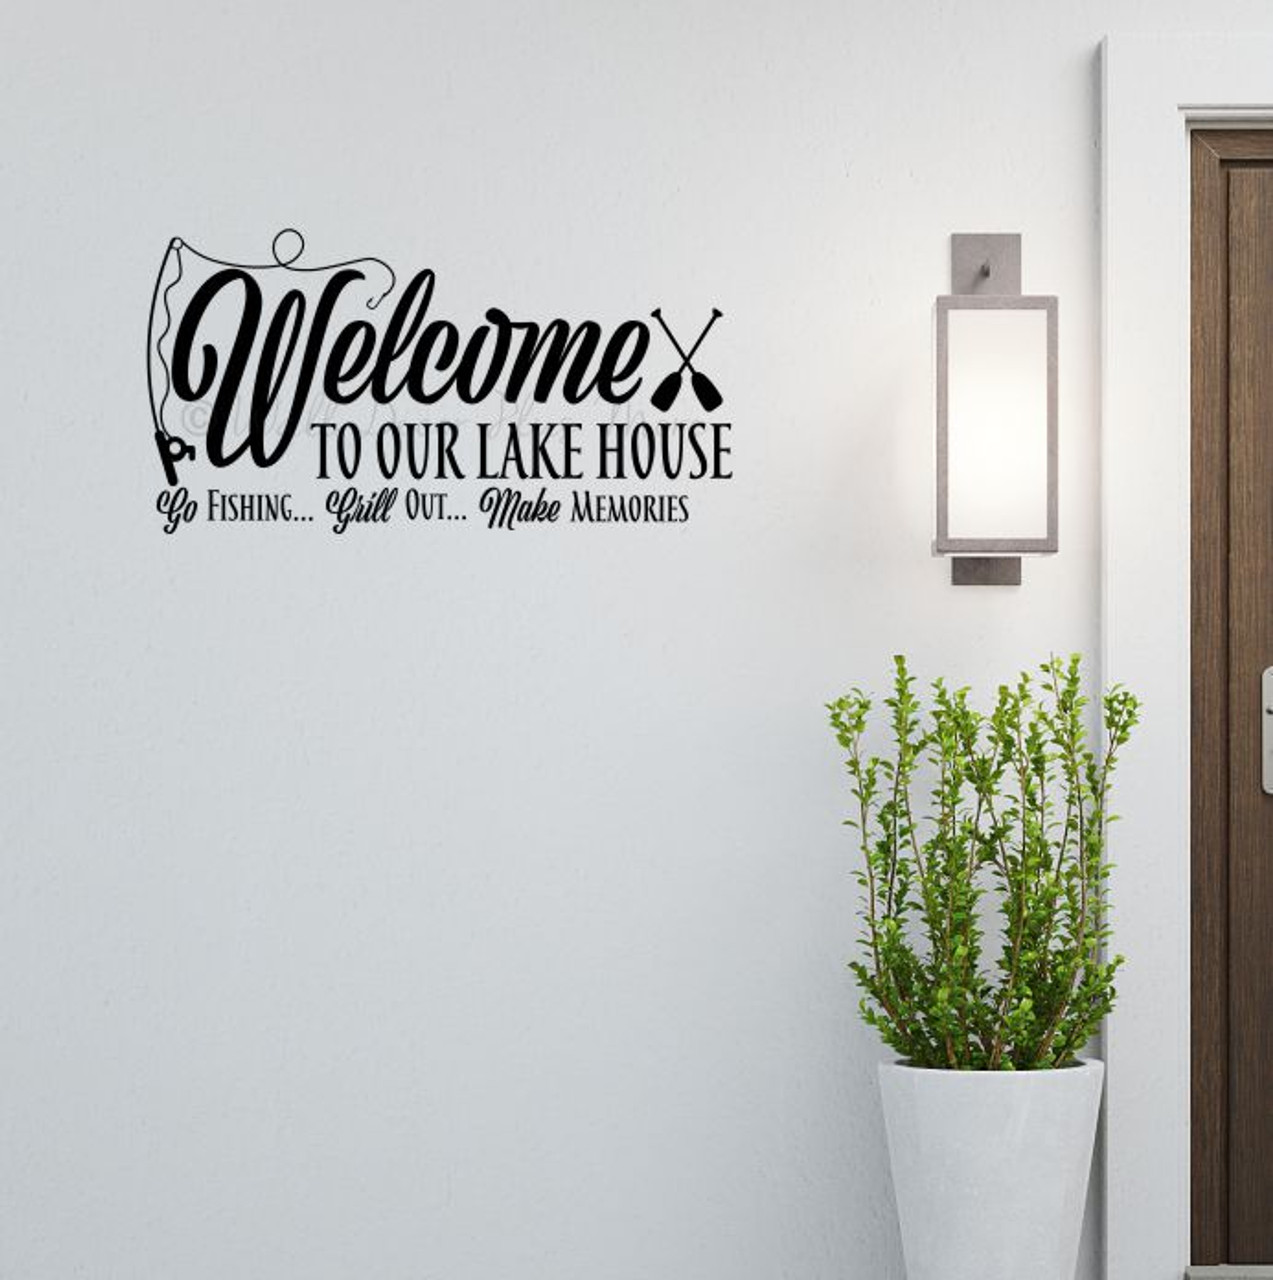 Welcome To Lake House Fishing Grill Memories Wall Sticker Decal Quote